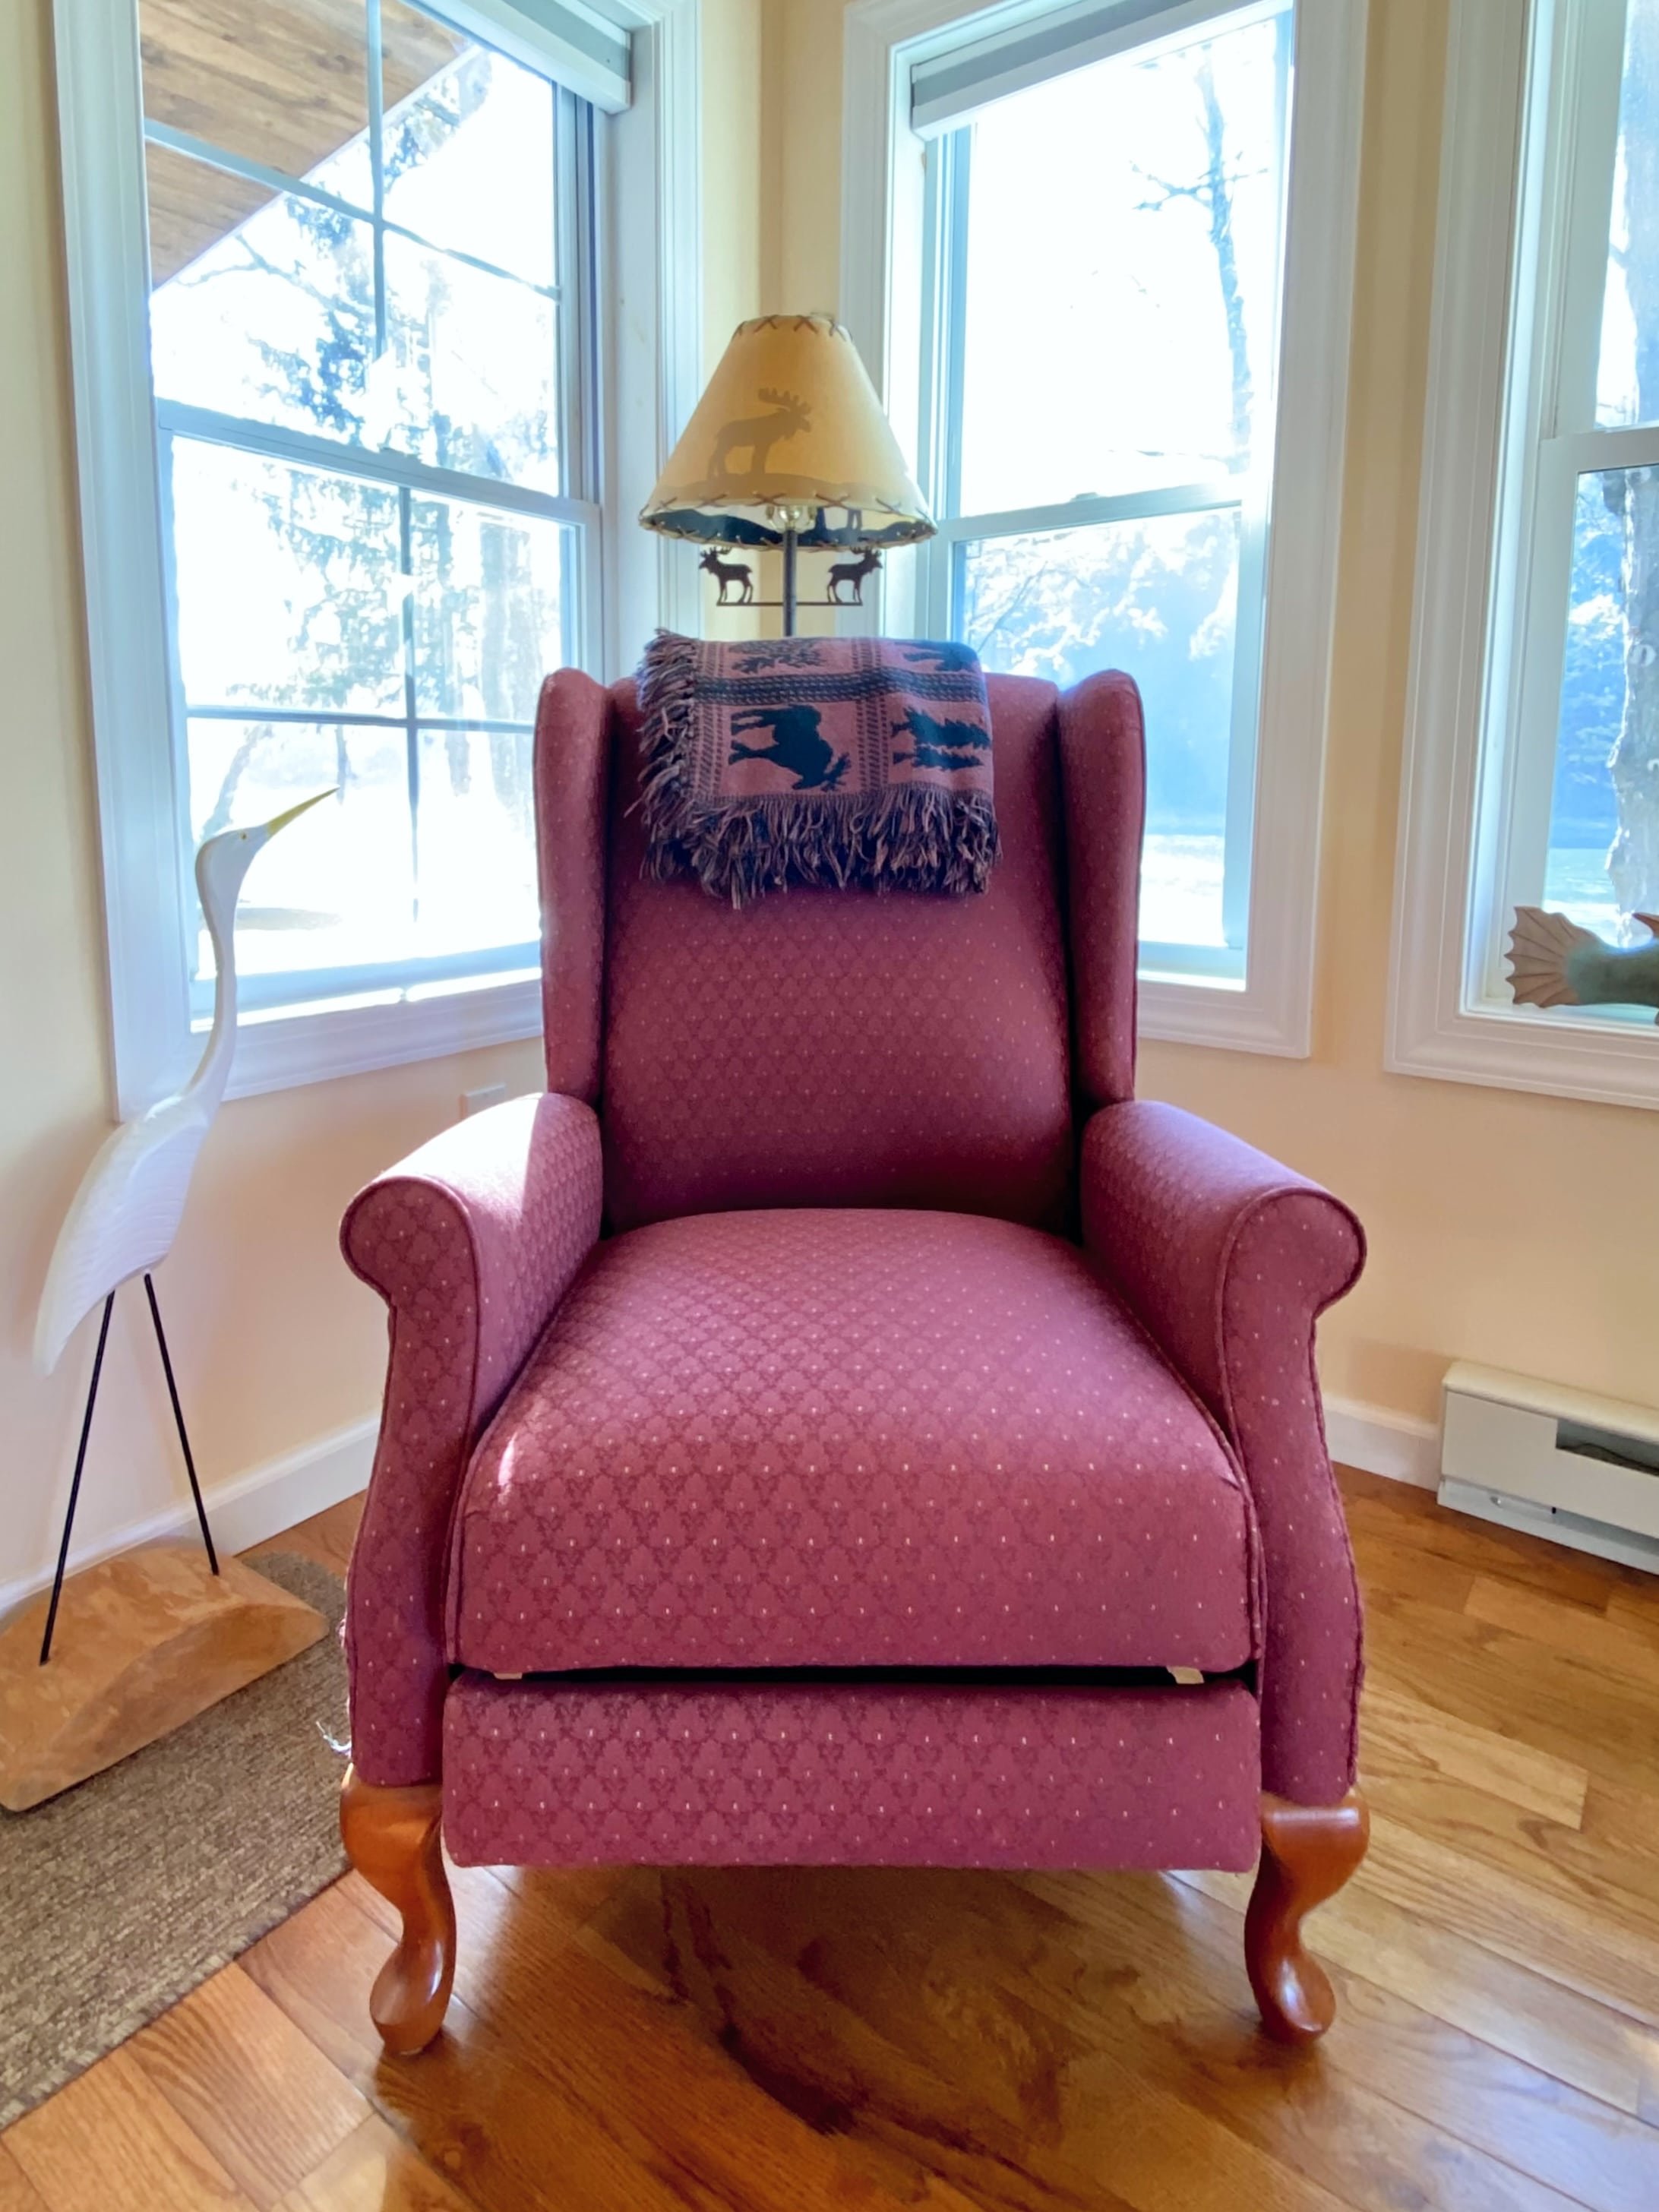 Reading Chair_Mission Possible Airbnb_NarrowsburgNY.jpg